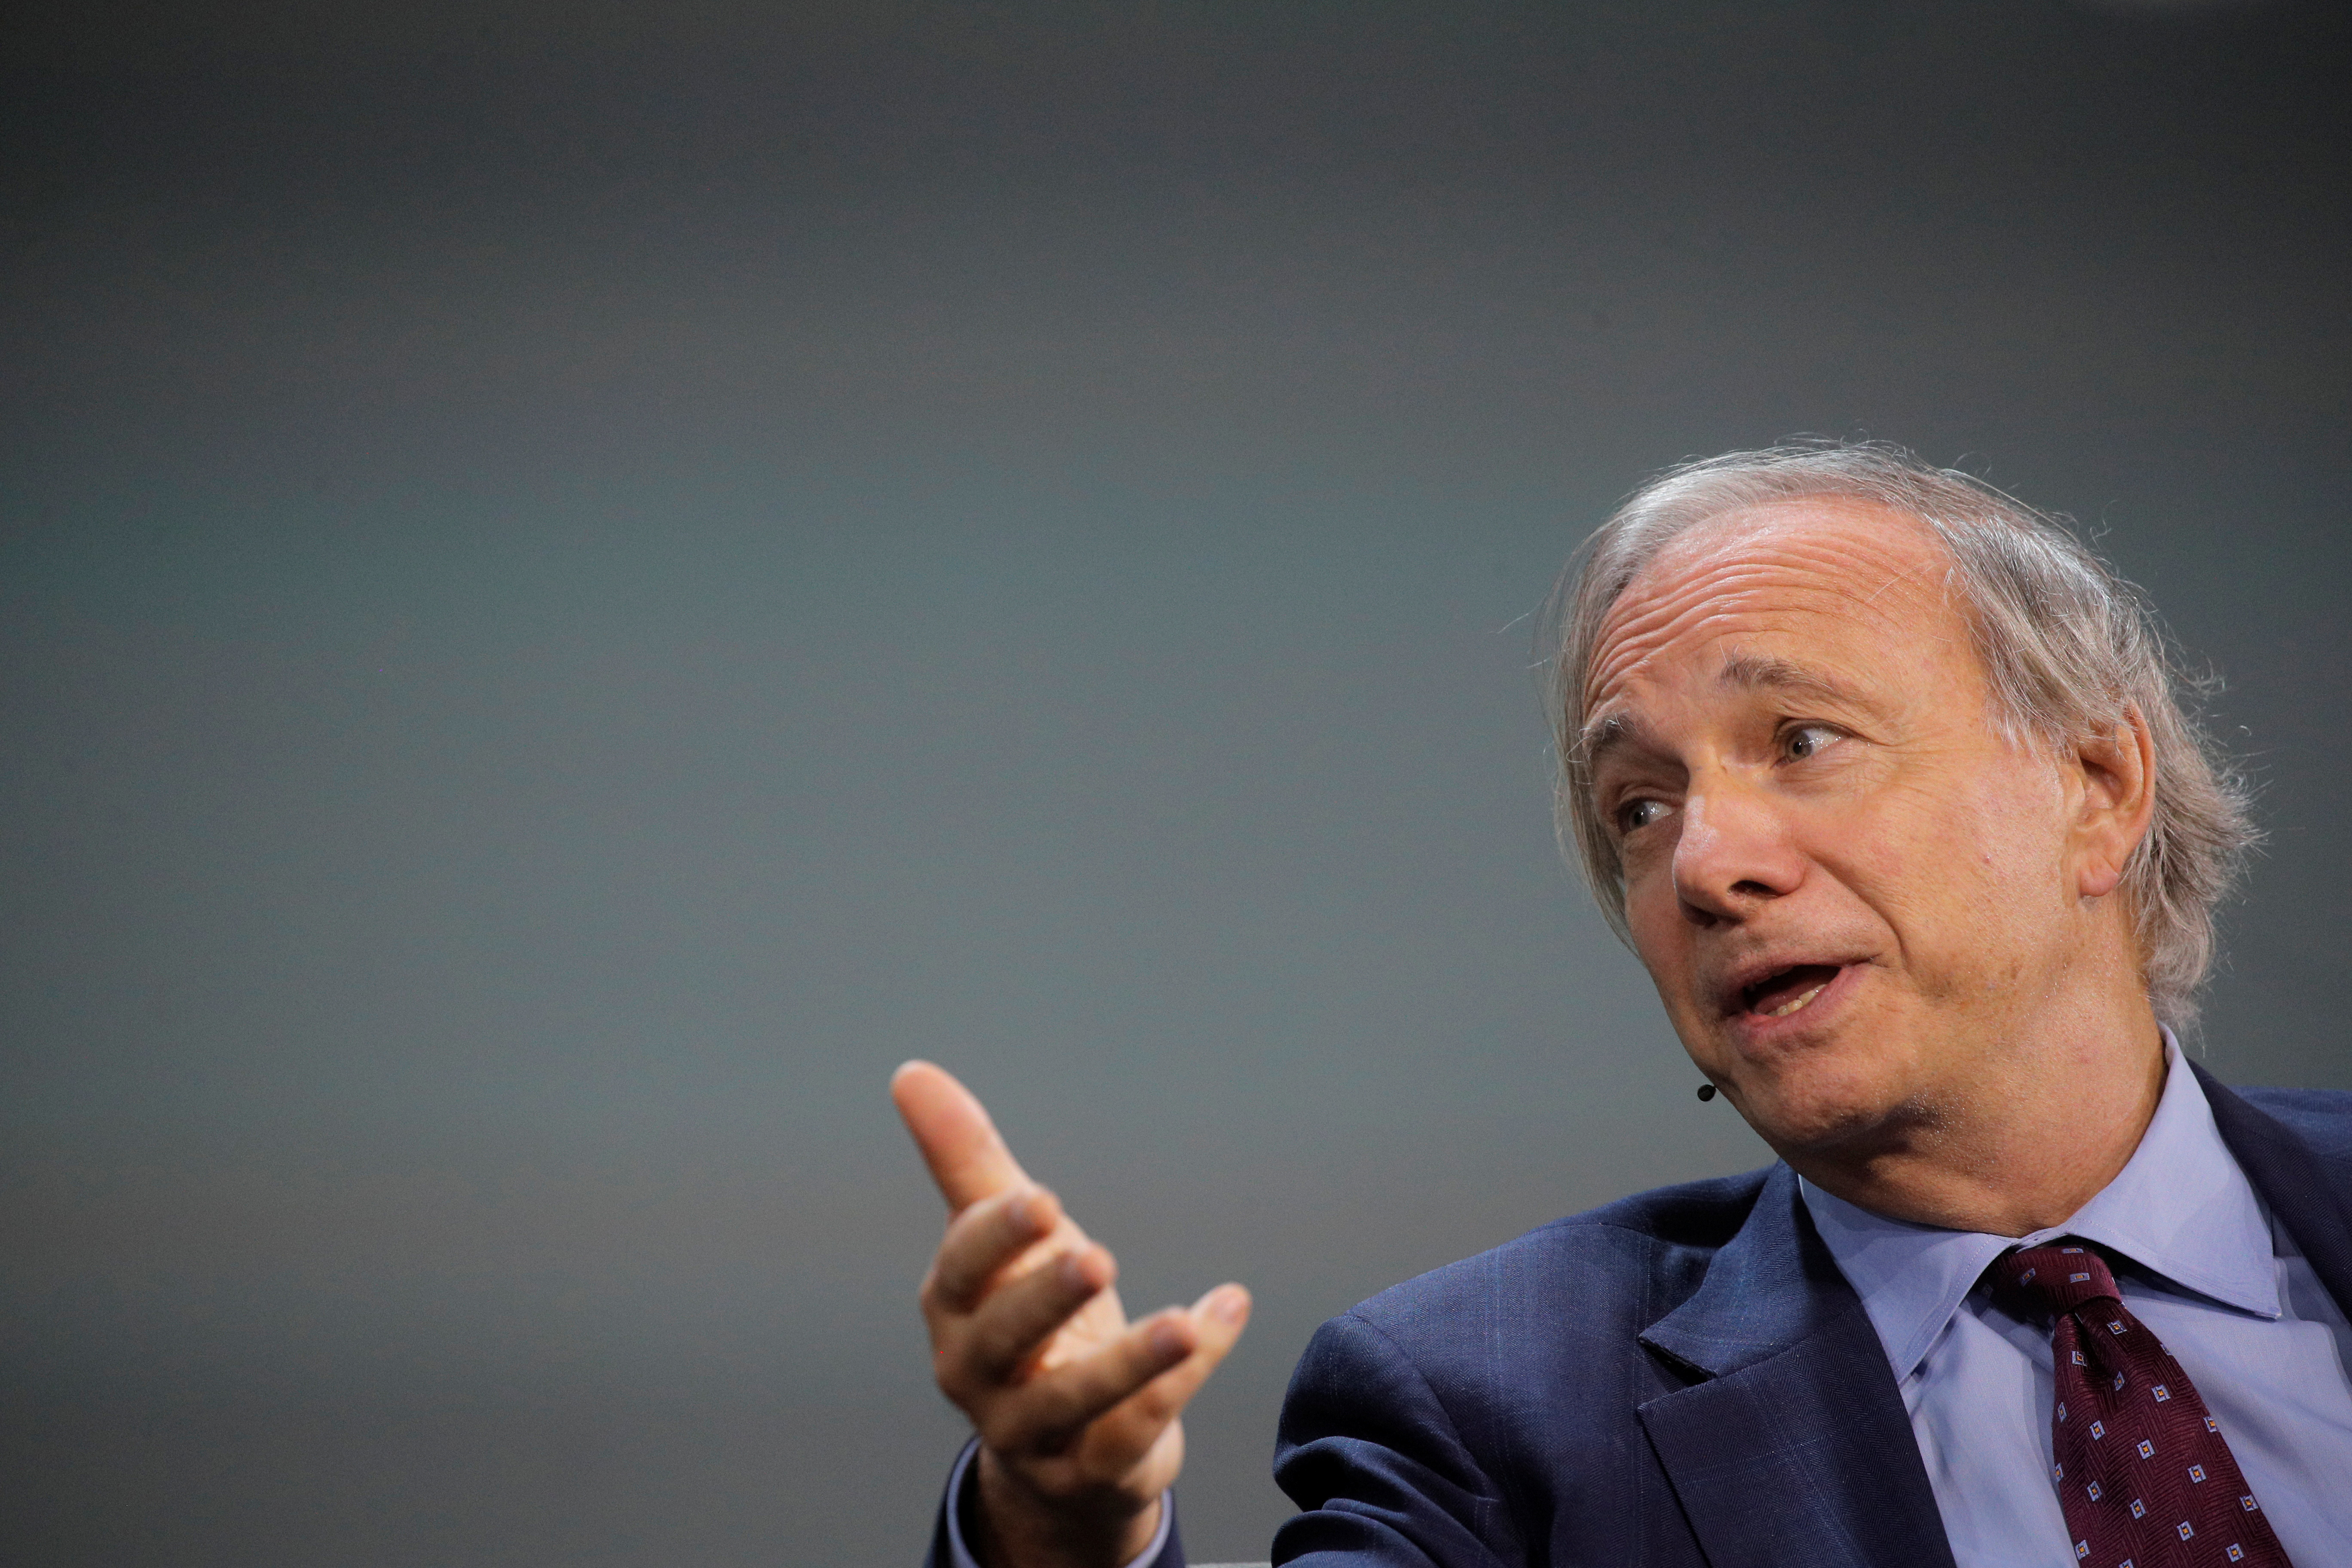 Ray Dalio, Bridgewater's Co-Chairman and Co-Chief Investment Officer speaks during the Skybridge Capital SALT New York 2021 conference in New York